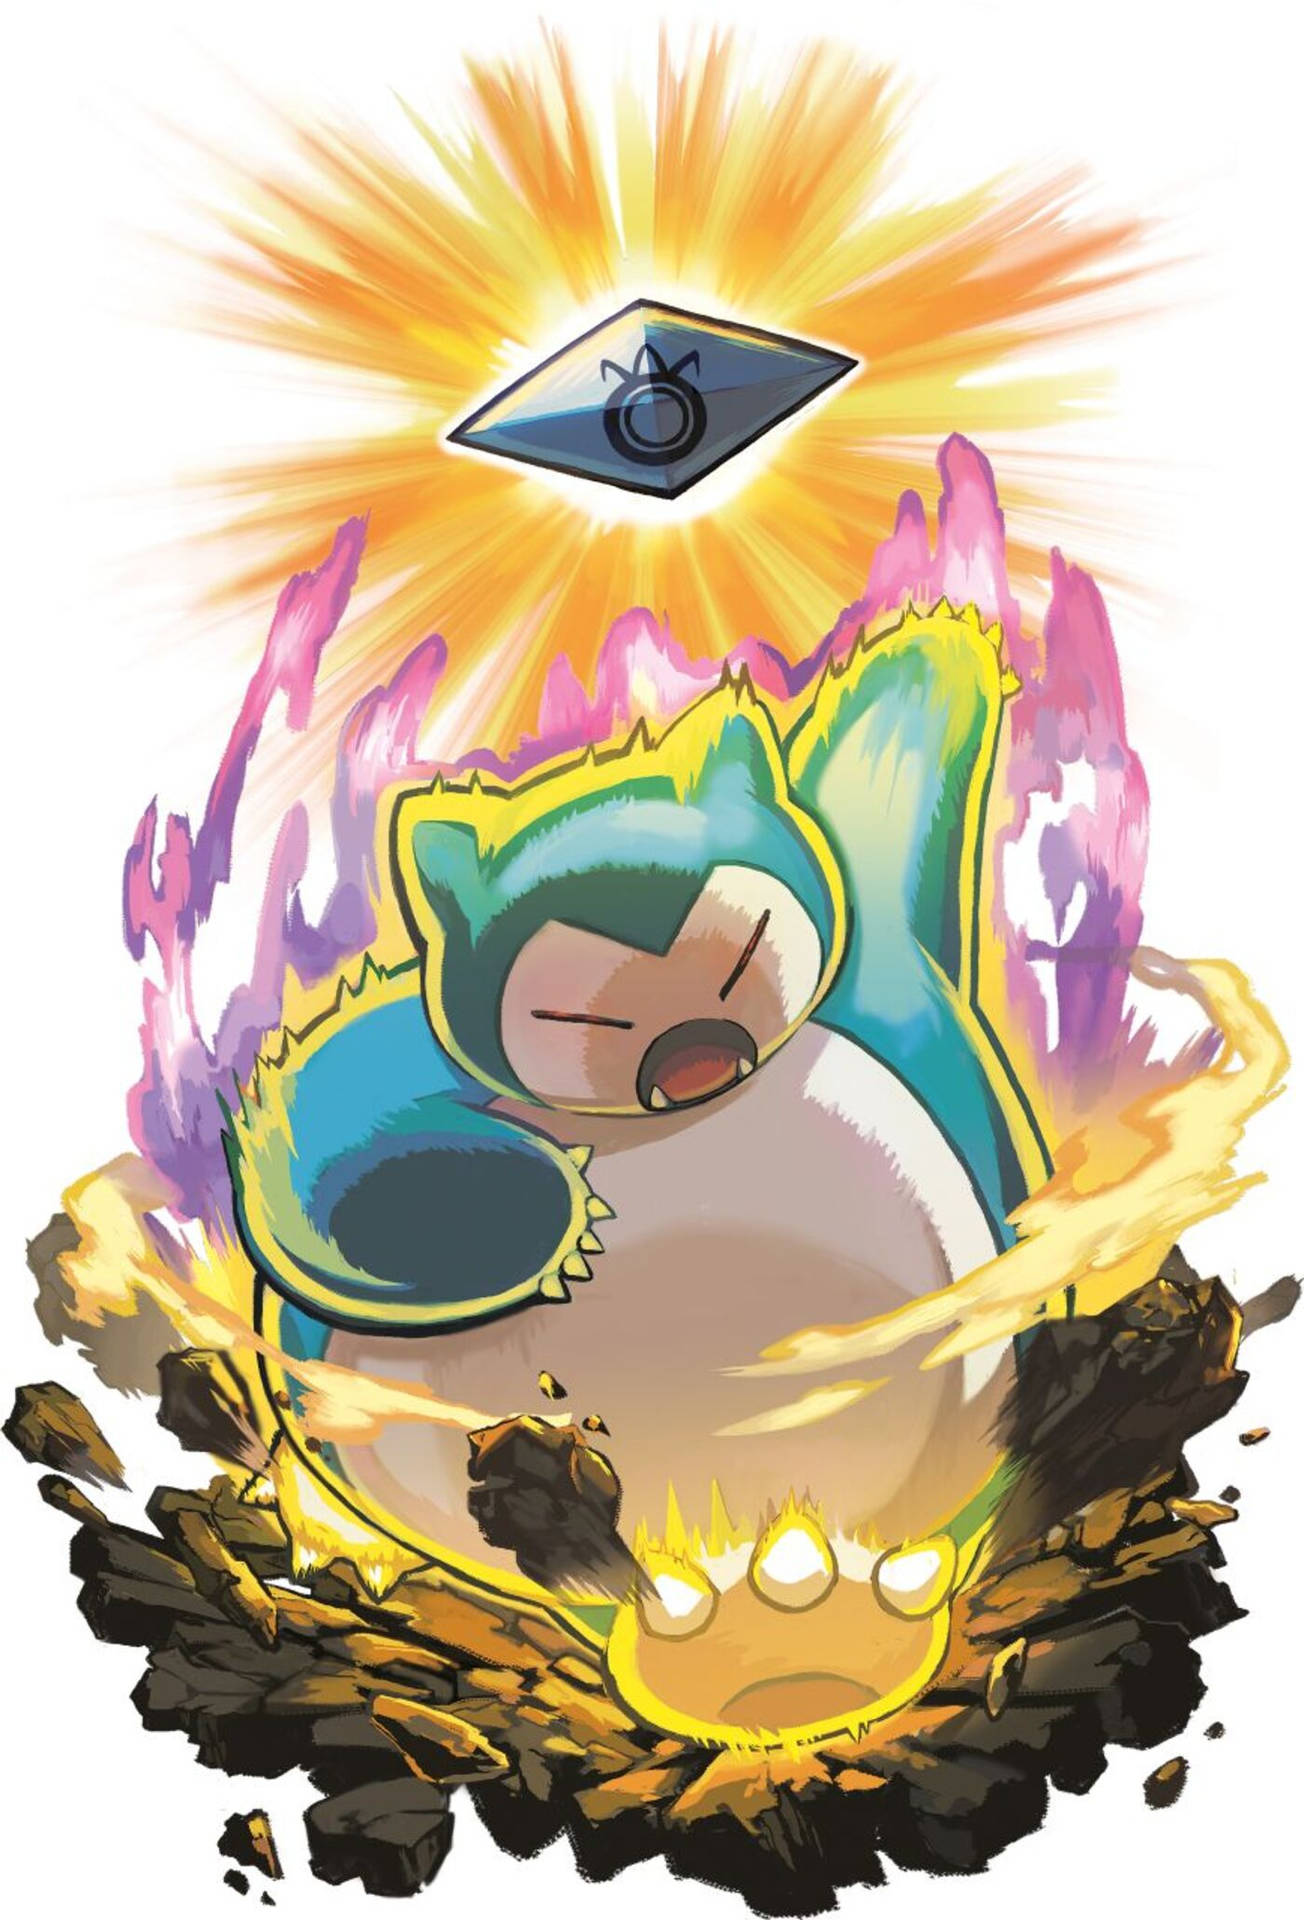 Fiery, Angry Snorlax